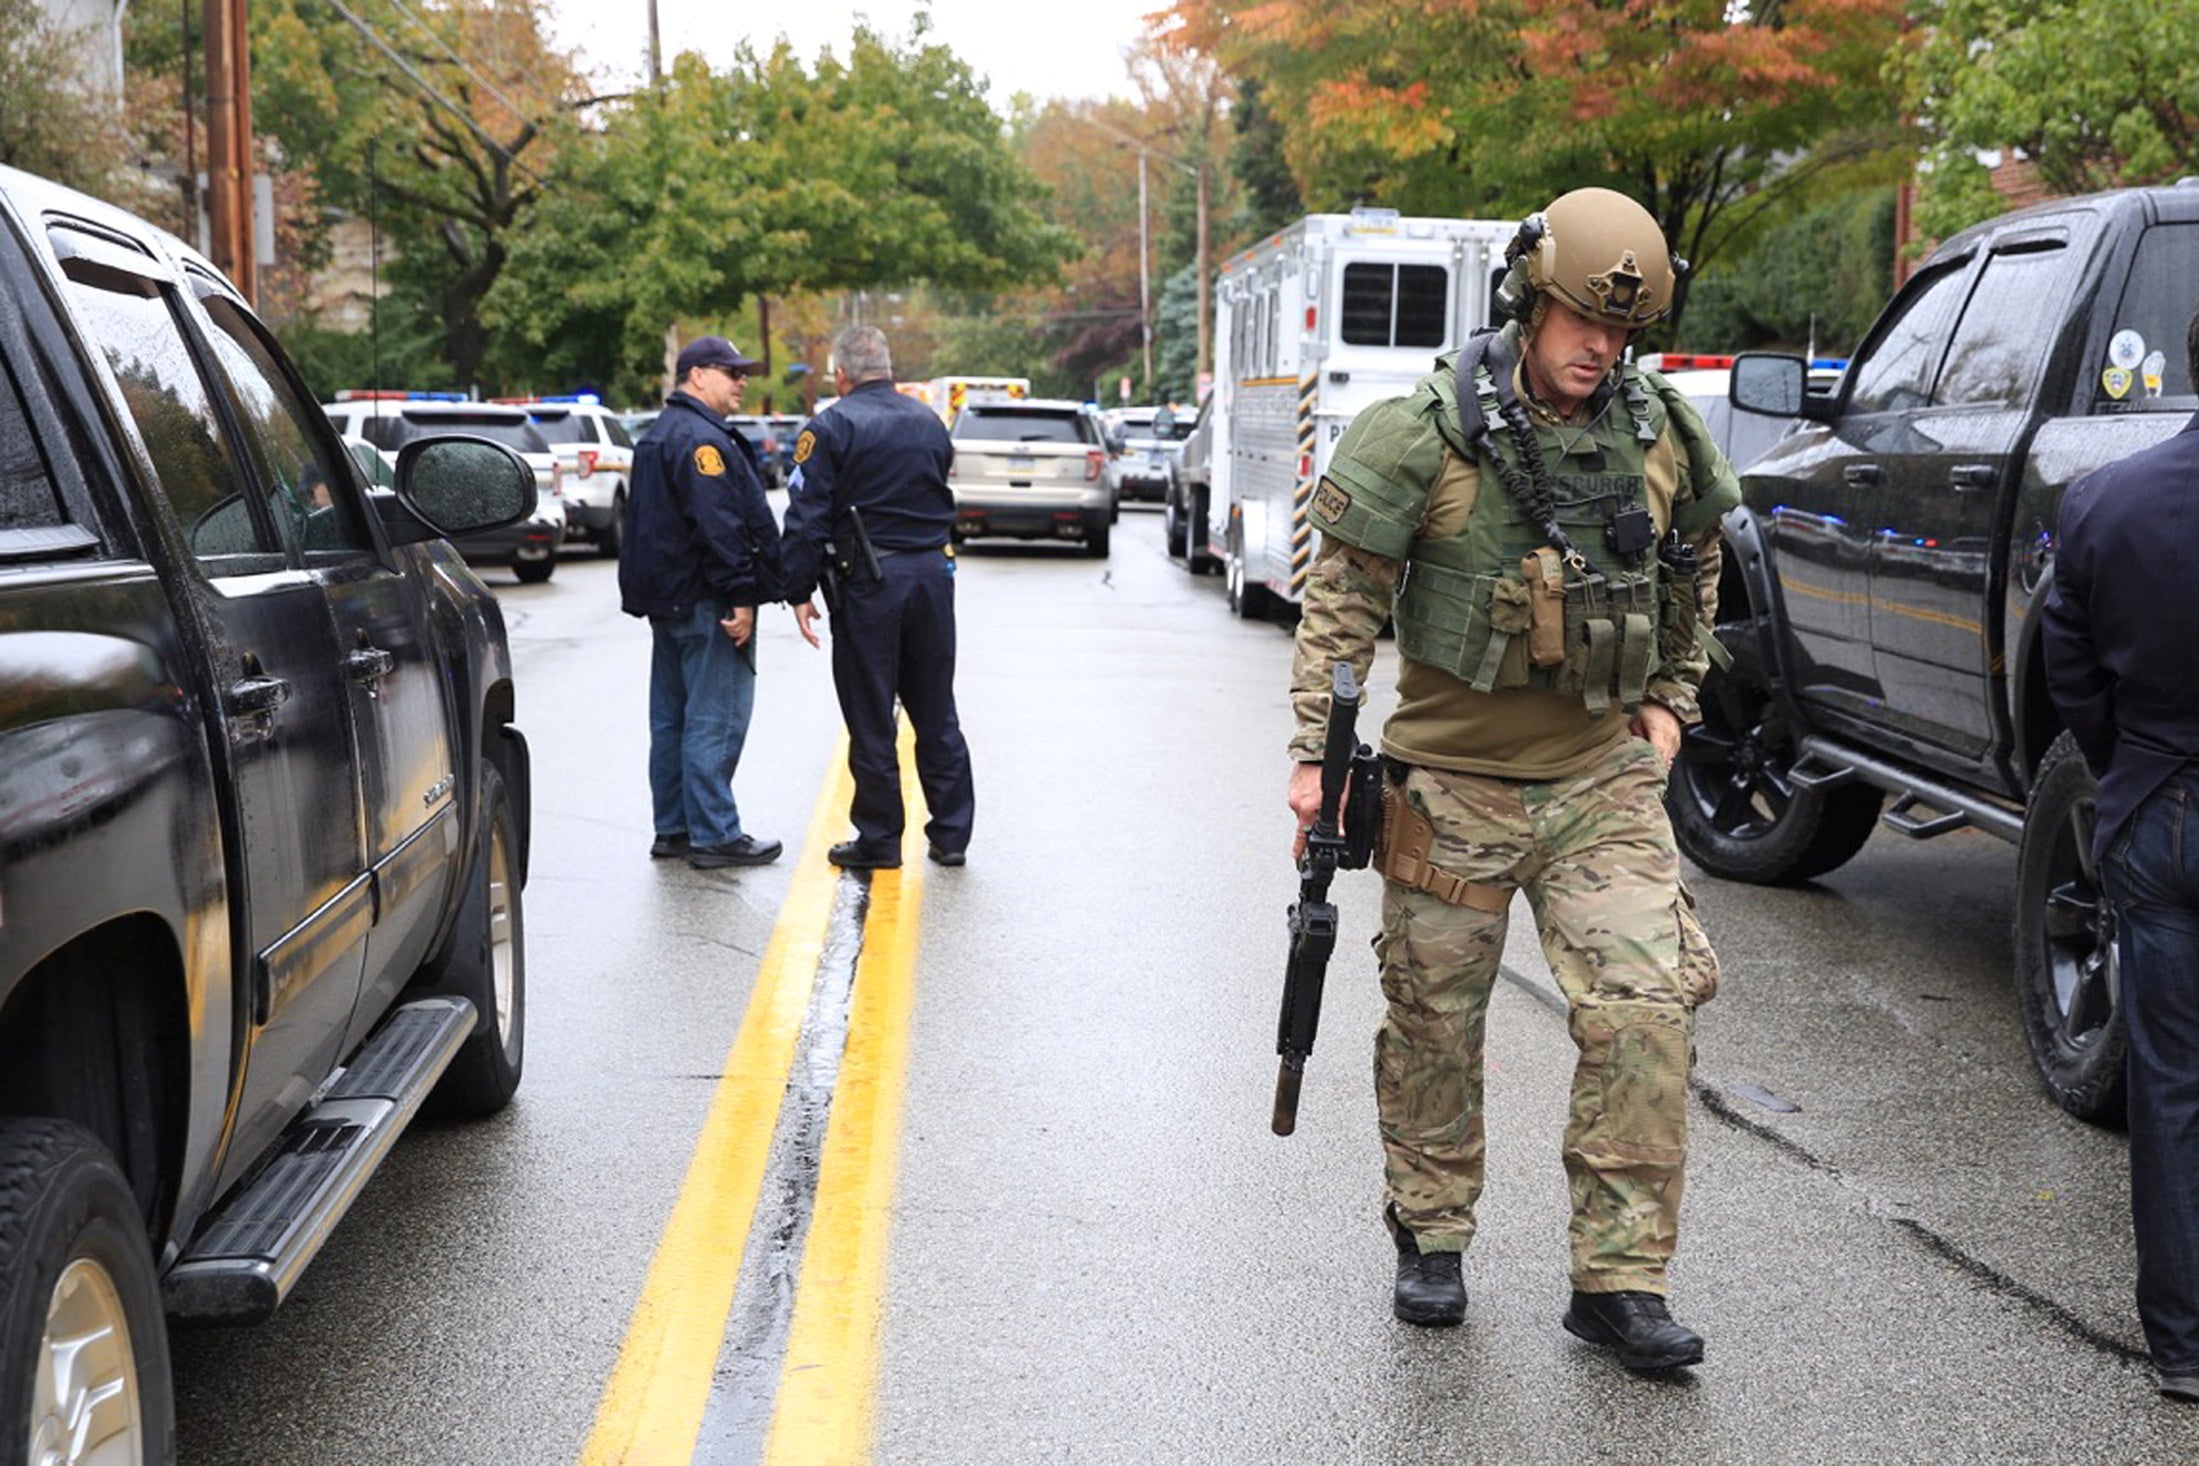 A SWAT police officer and other first responders respond after a gunman opened fire at the Tree of Life synagogue in Pittsburgh, Pennsylvania on October 27, 2018. 